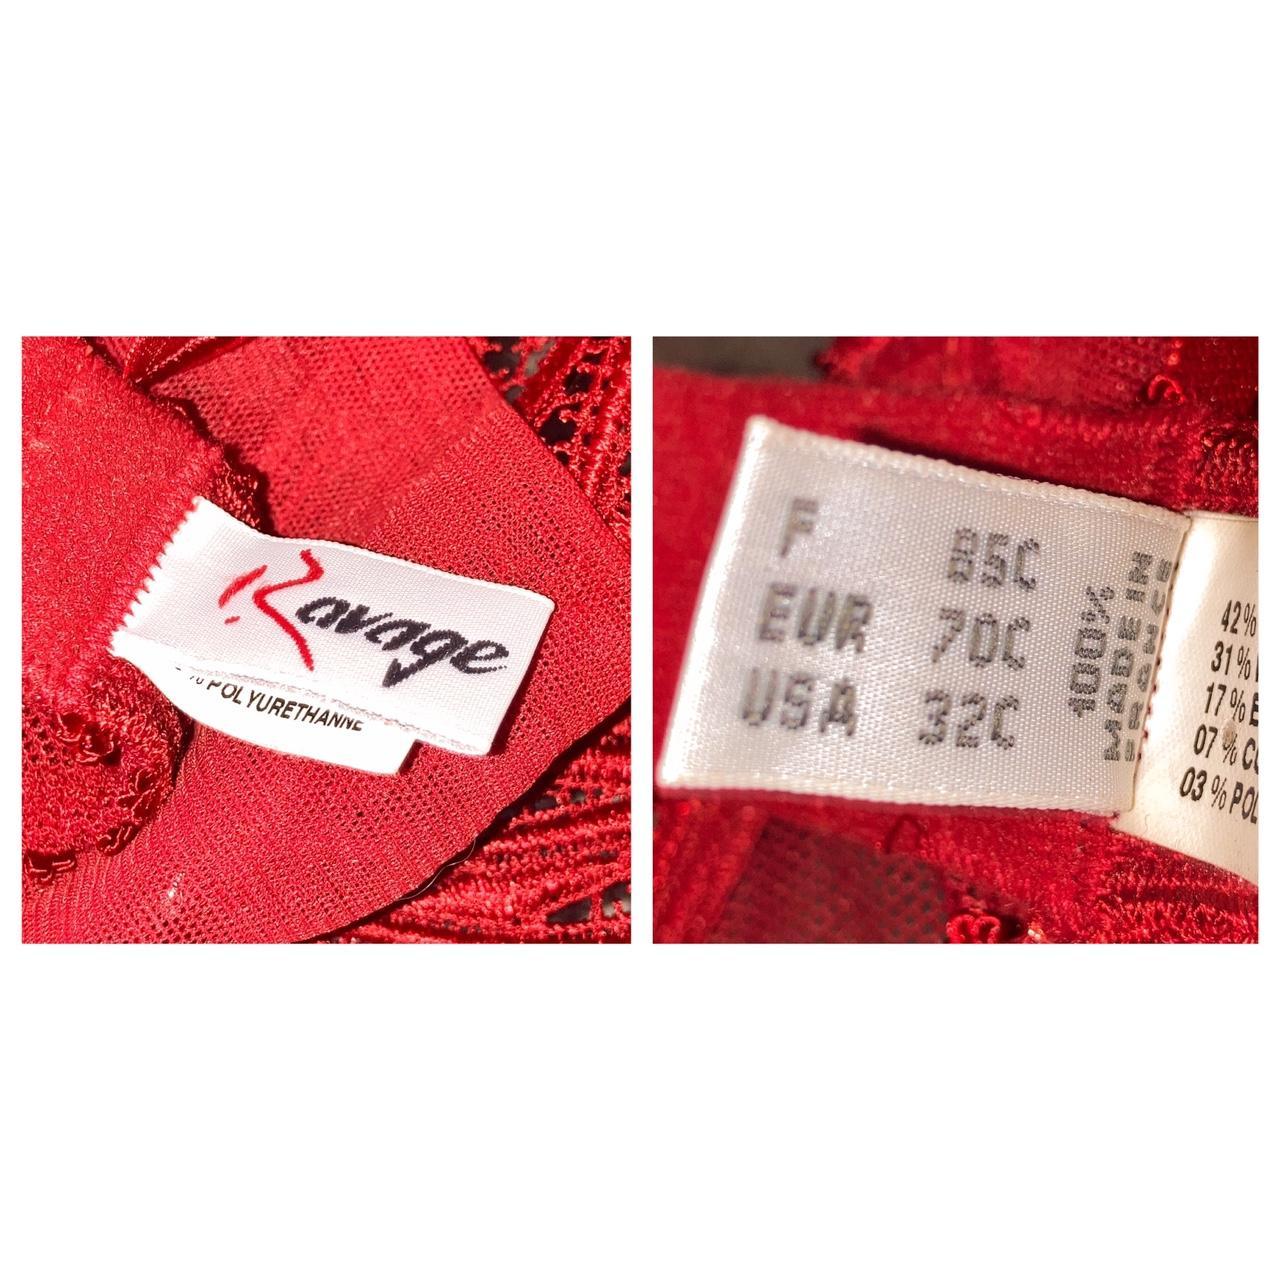 Ravage Rare vintage flame bra French lingerie from... - Depop